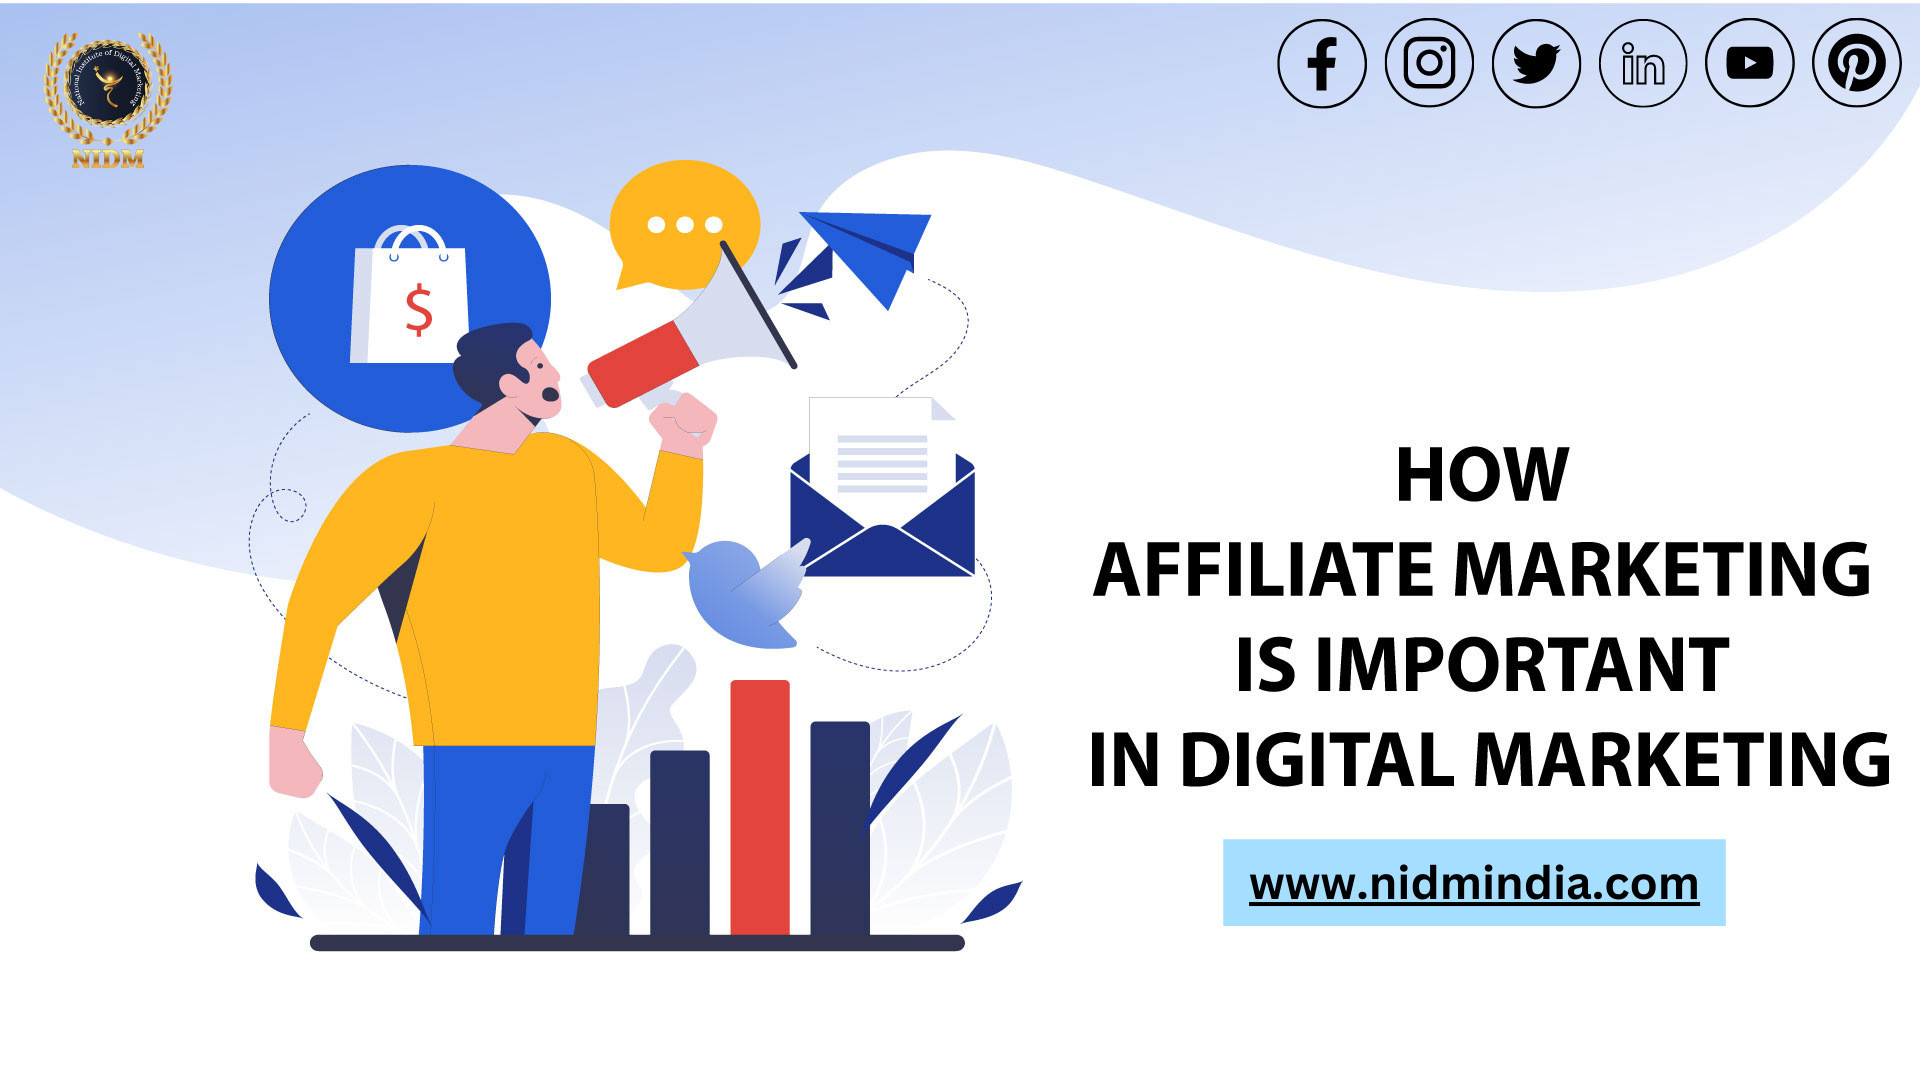 HOW AFFILIATE MARKETING IS IMPORTANT IN DIGITAL MARKETING